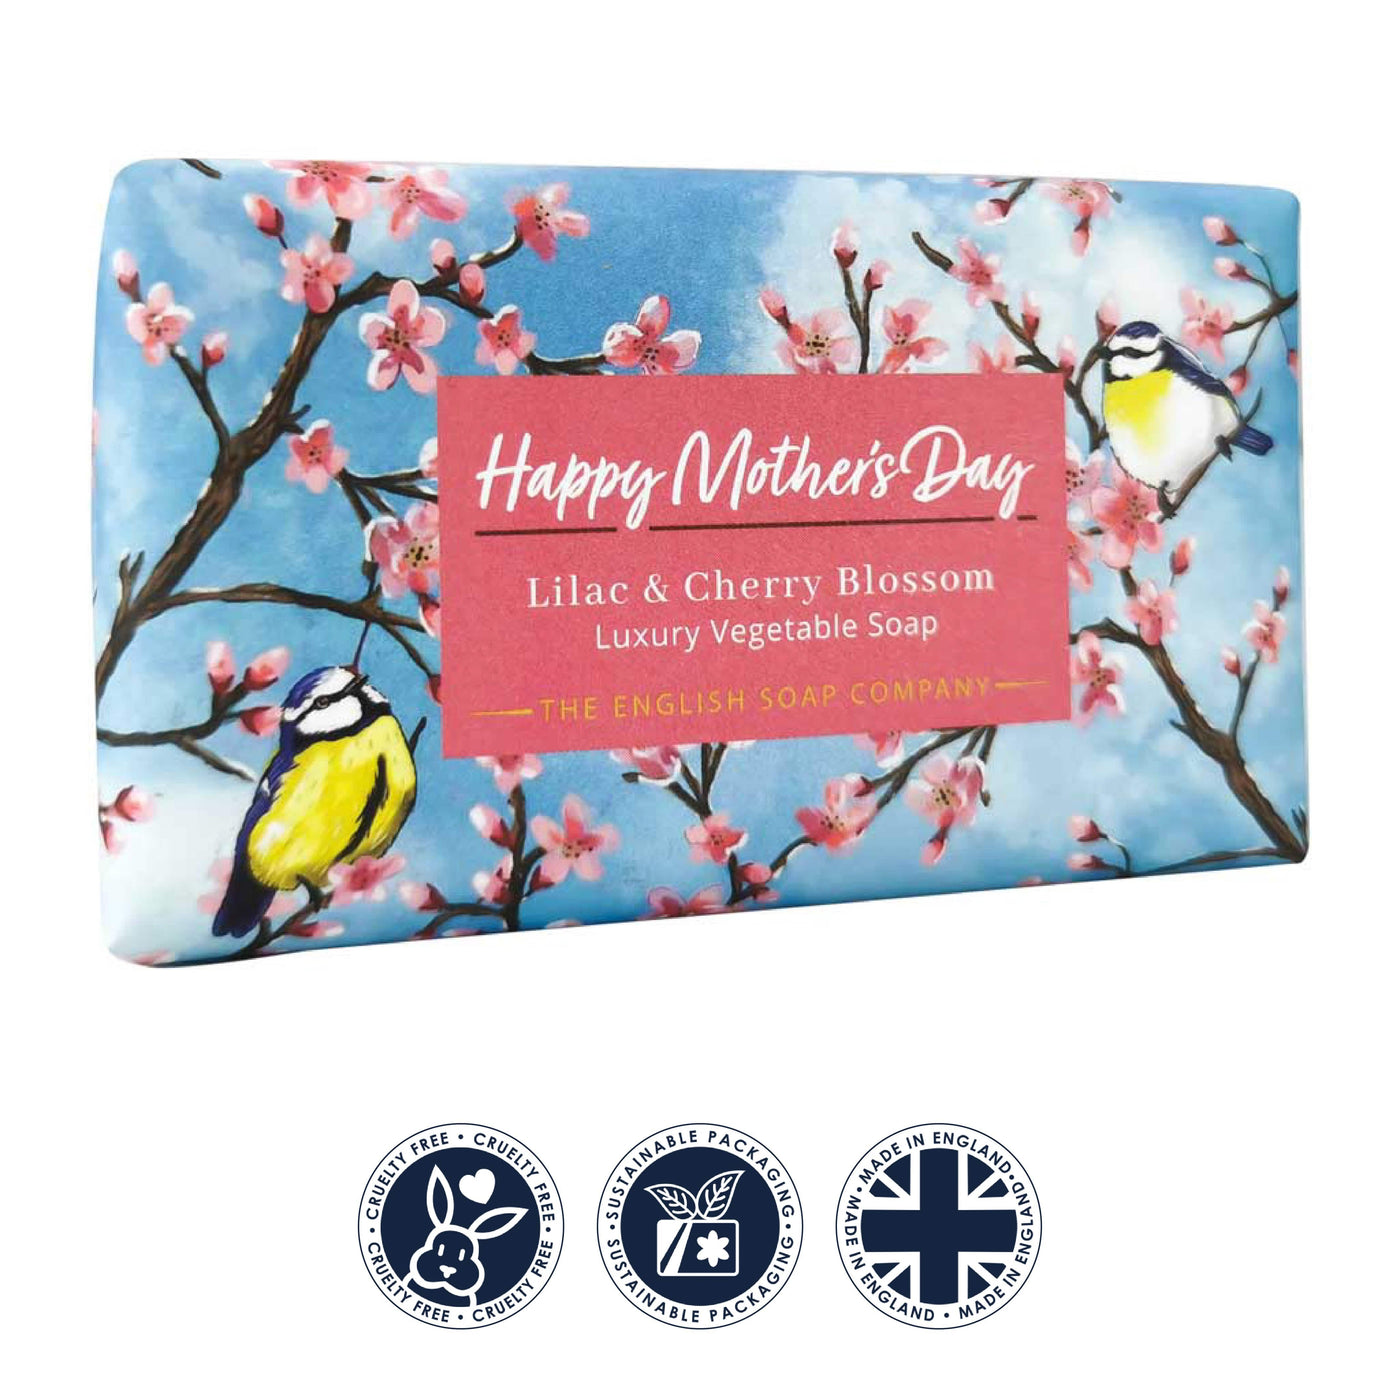 Happy Mother's Day Lilac and Cherry Blossom Gift Soap Bar from our Luxury Bar Soap collection by The English Soap Company